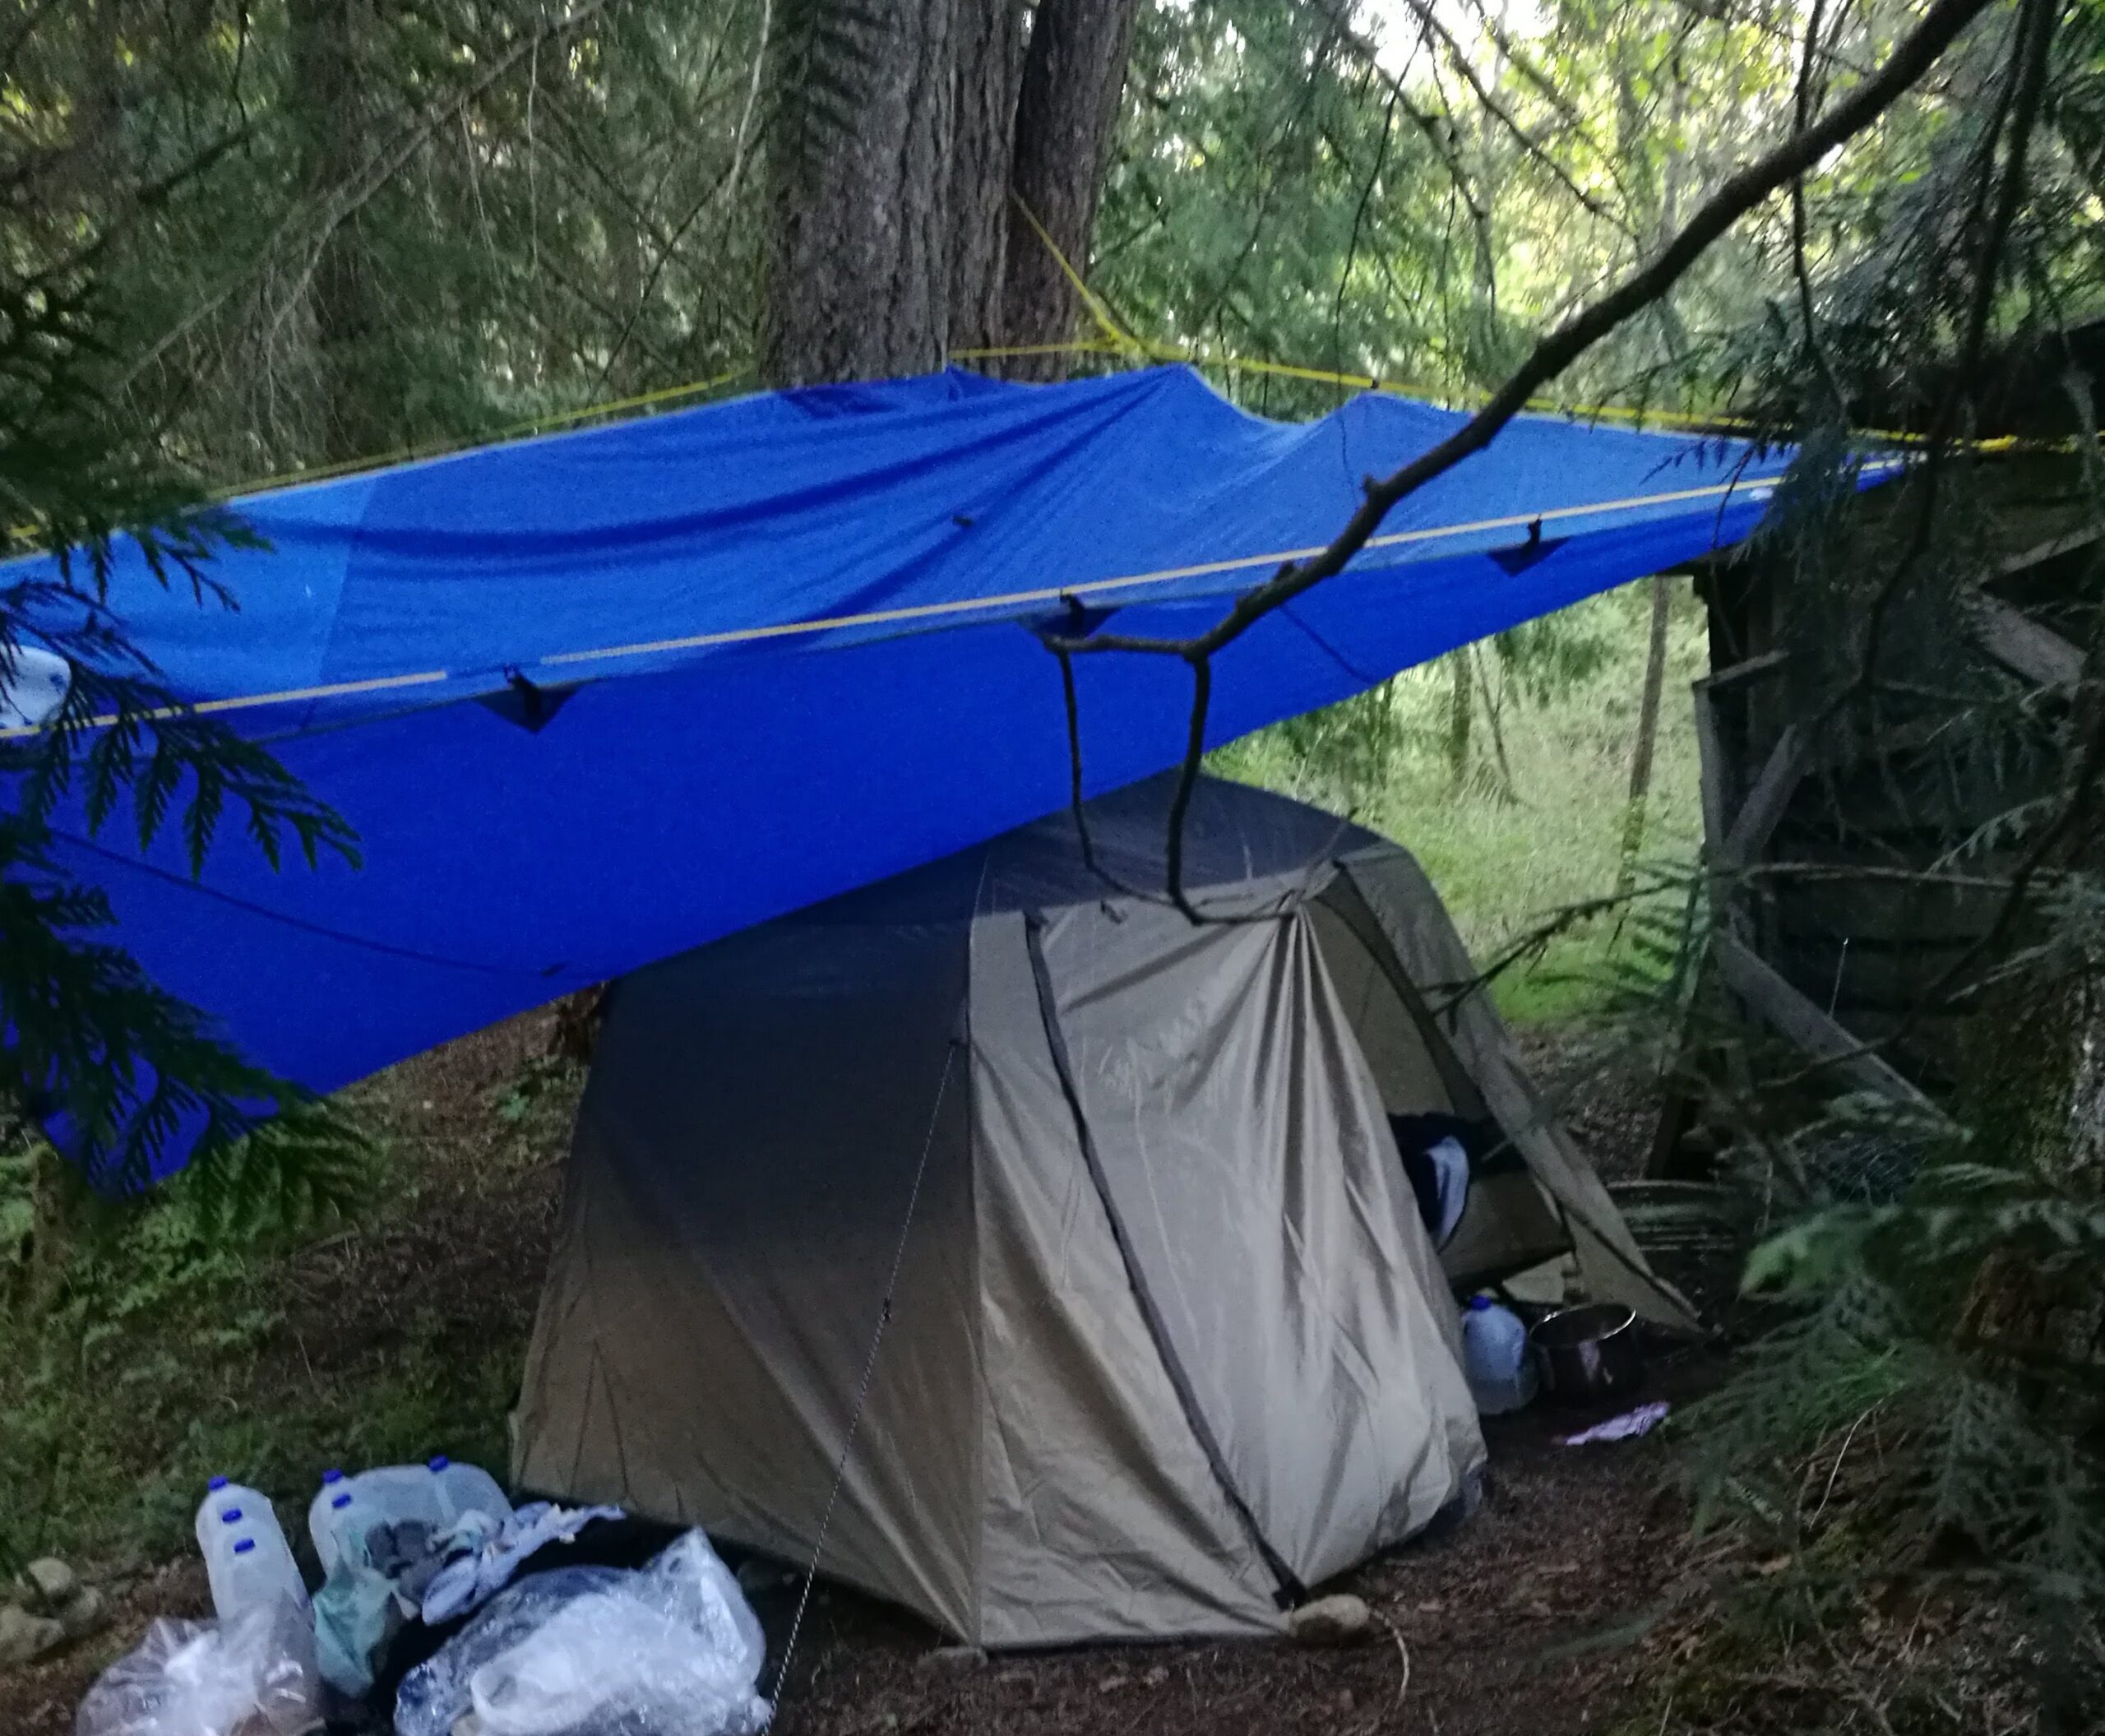 A blue tarp strung up on an angle between trees over my cot tent